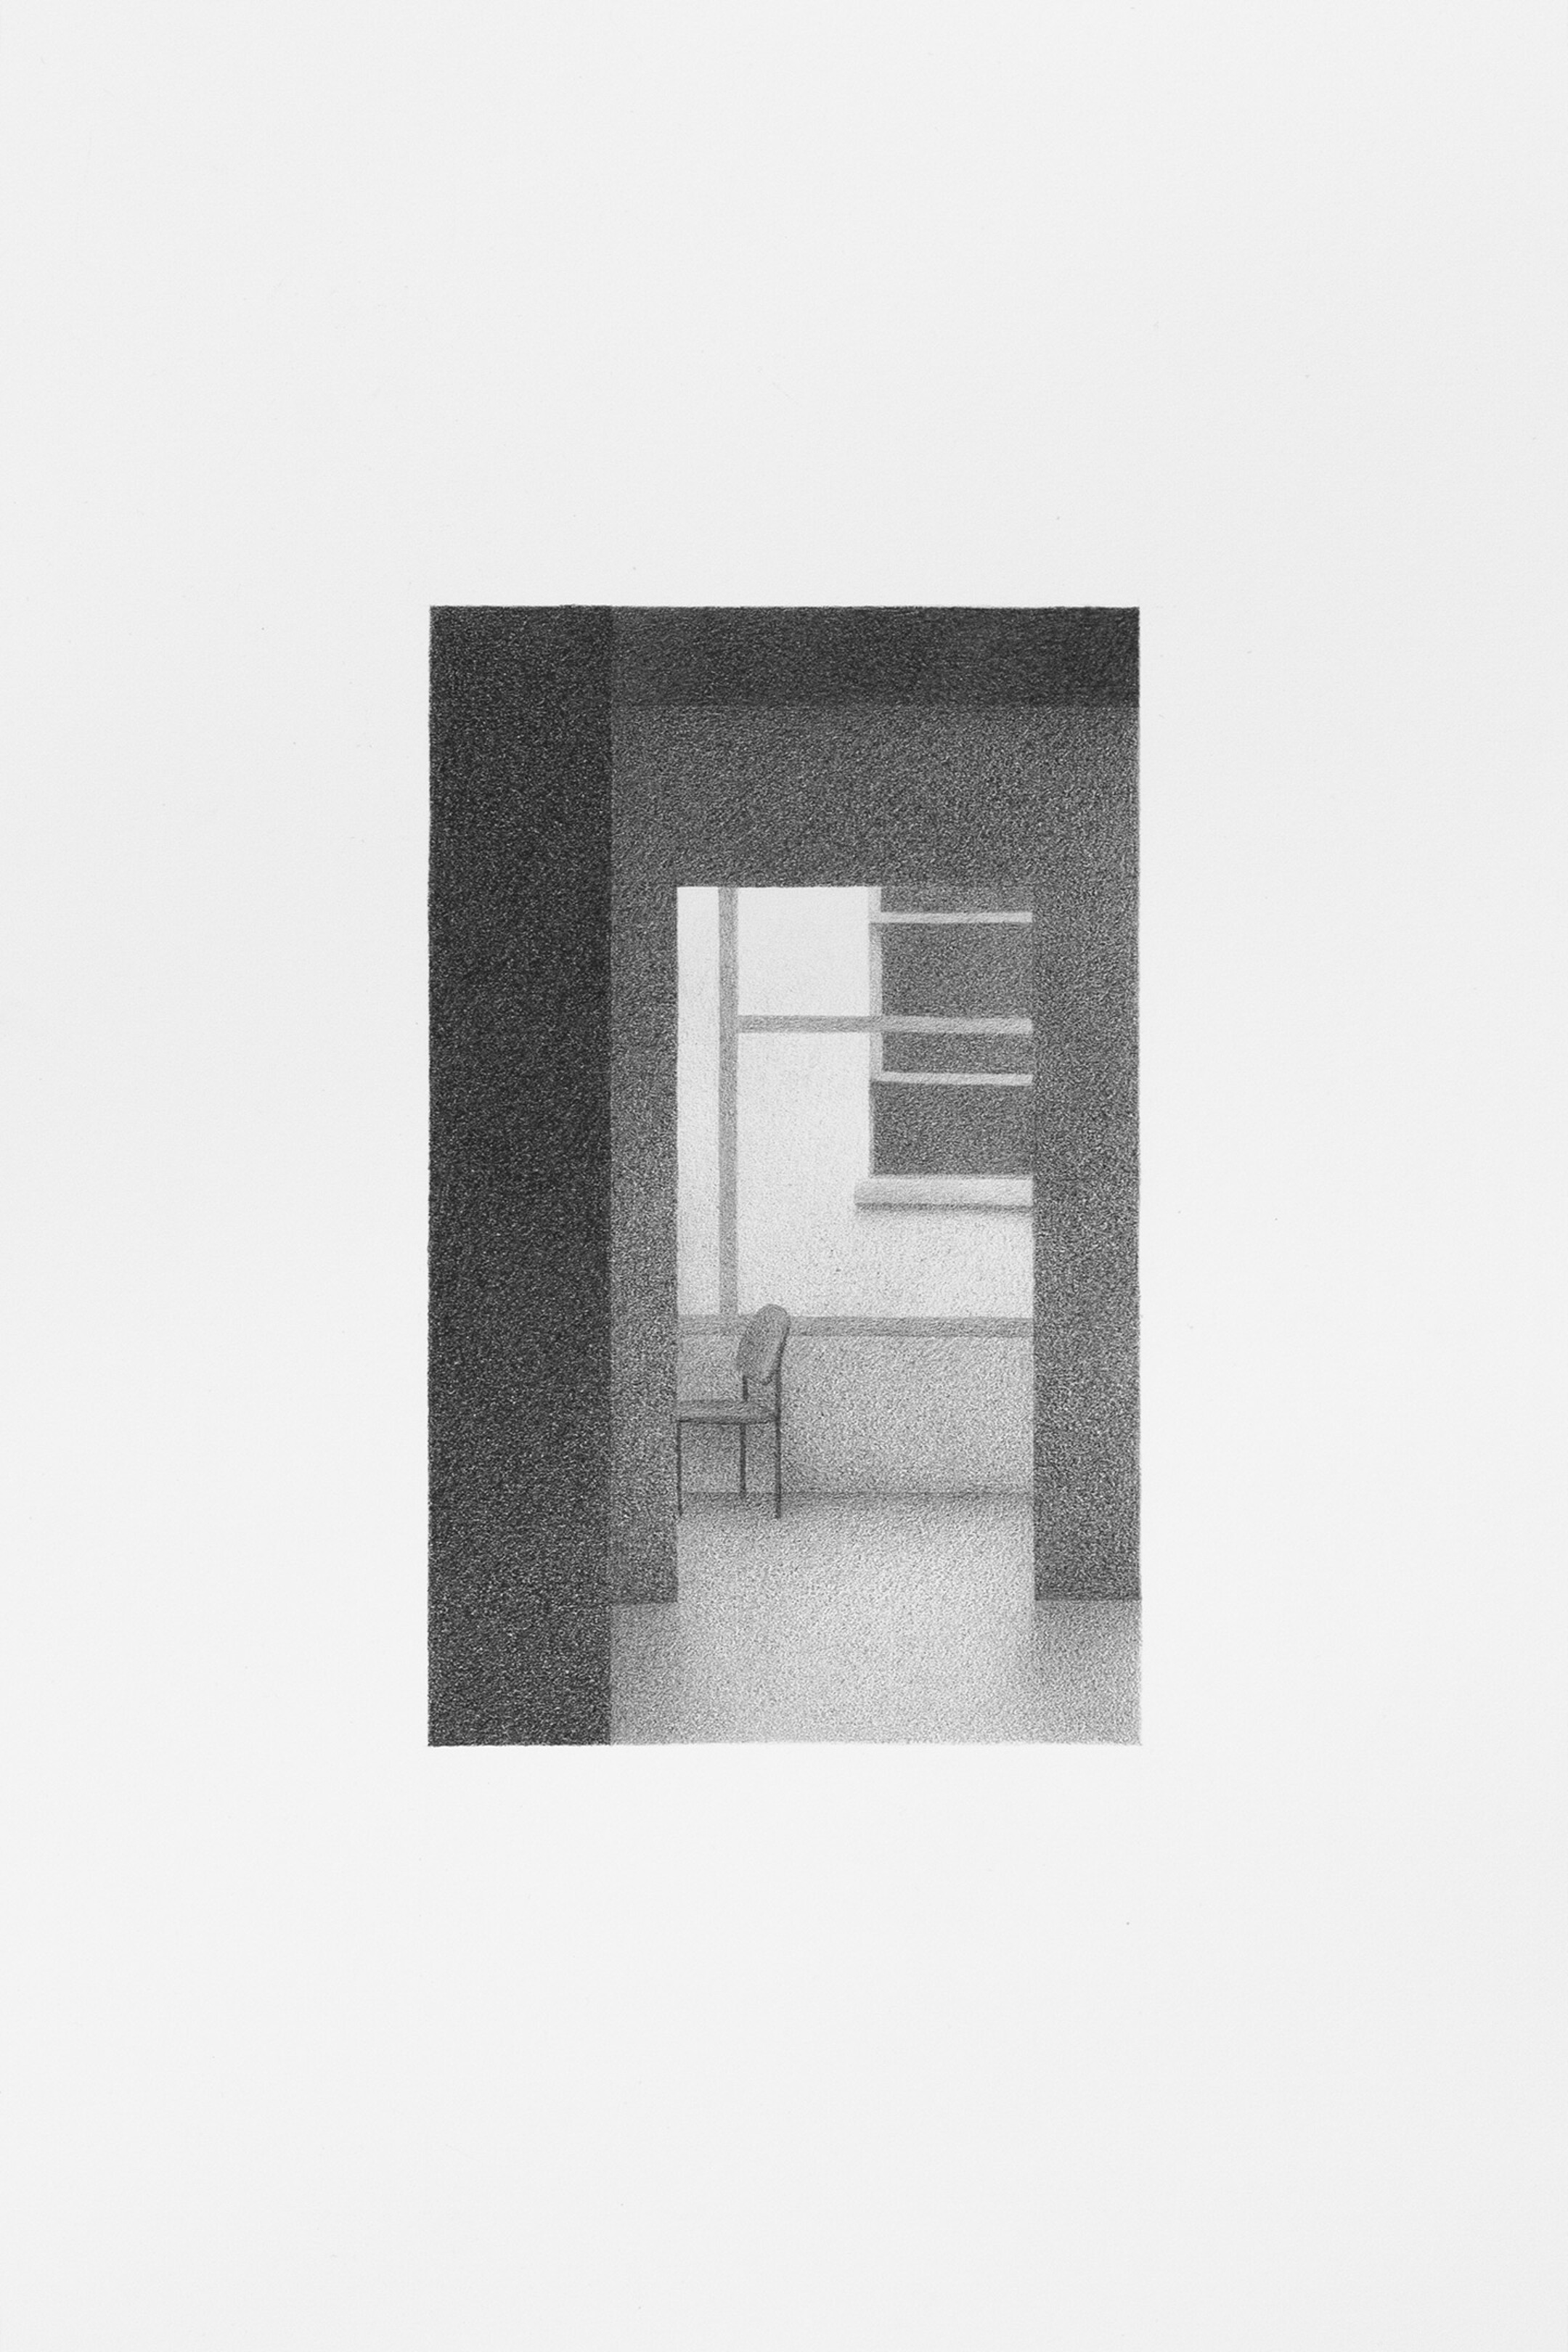 Drawing of an imaginary interior space in pencil on paper